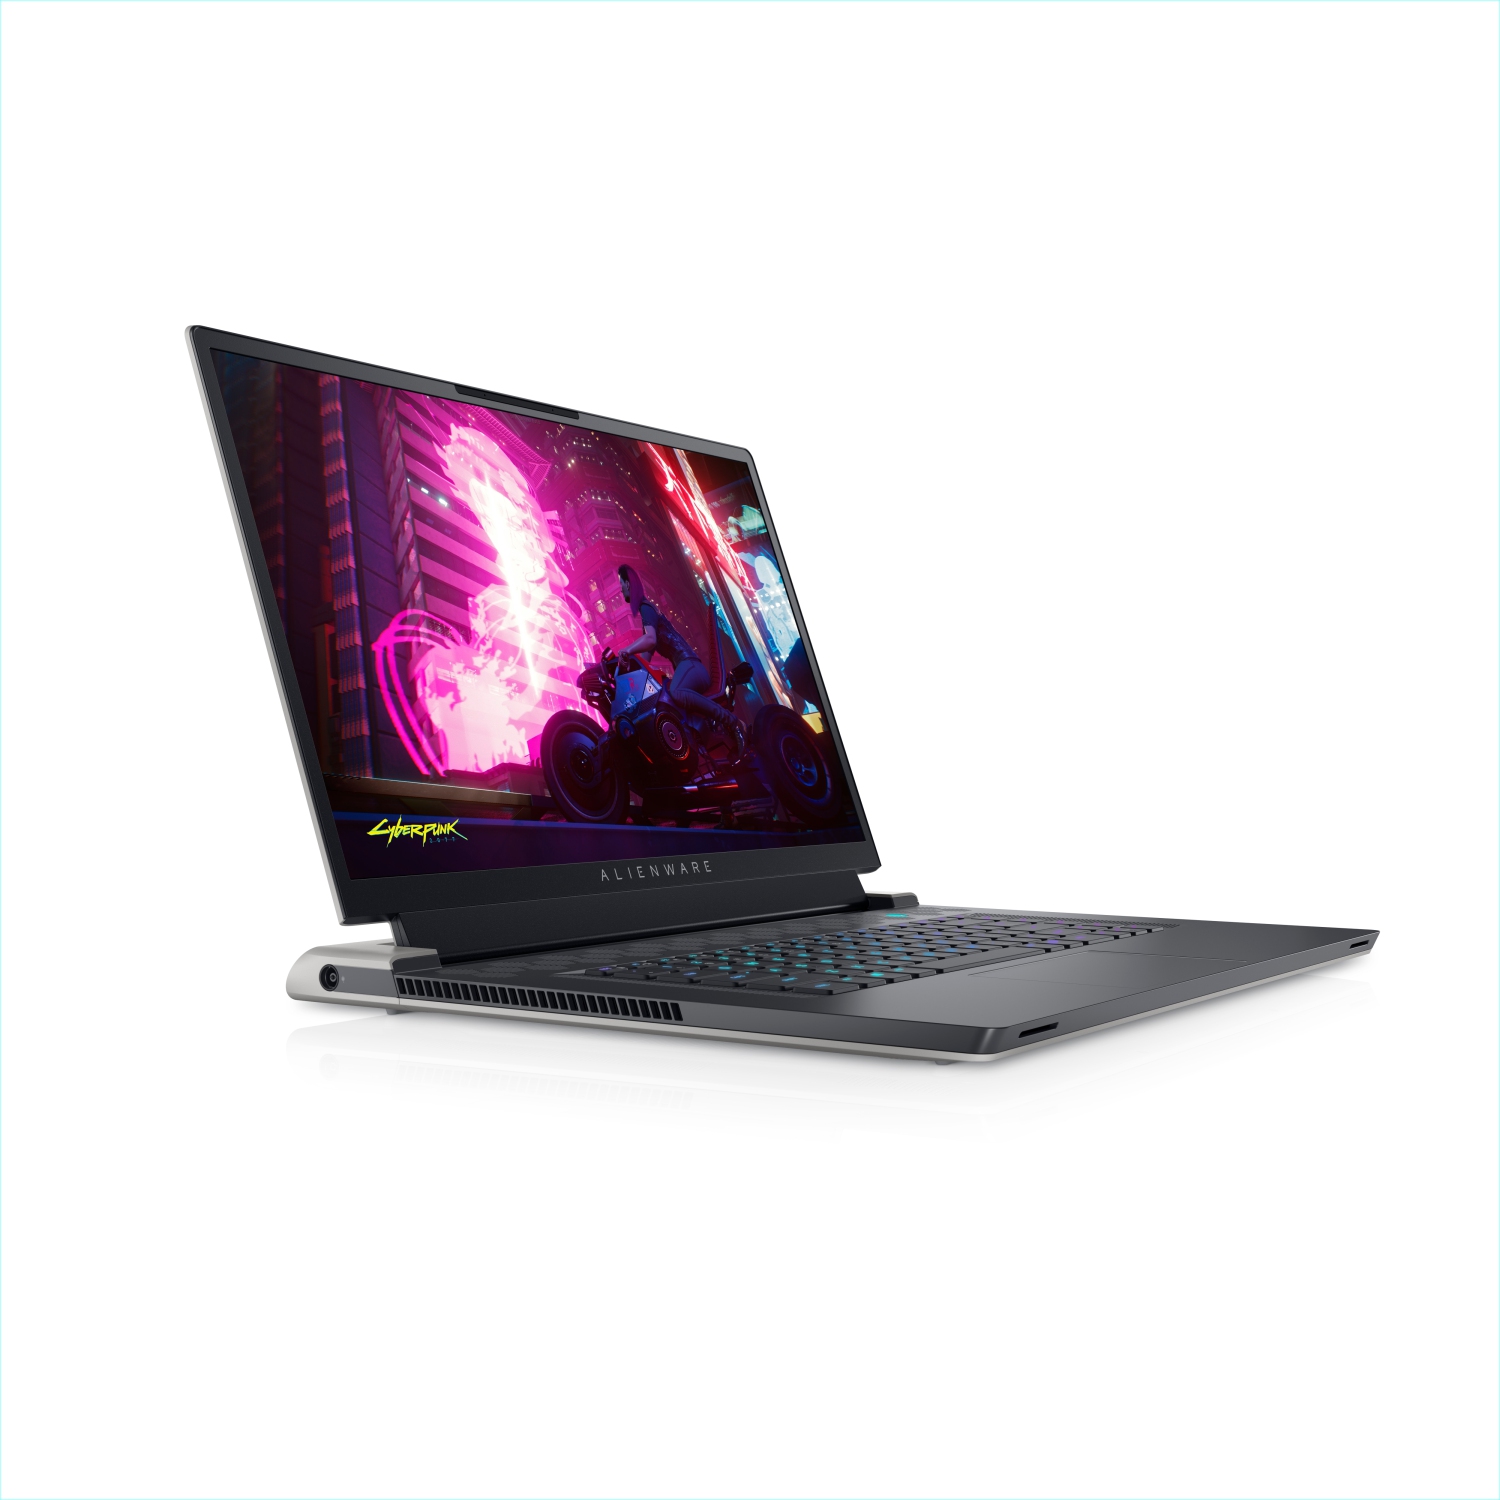 Refurbished (Excellent) - Dell Alienware X17 R1 Gaming Laptop (2021), 17.3" 4K, Core i7, 512GB SSD, 32GB RAM, RTX 3070, 8 Cores @ 4.6 GHz, 11th Gen CPU Certified